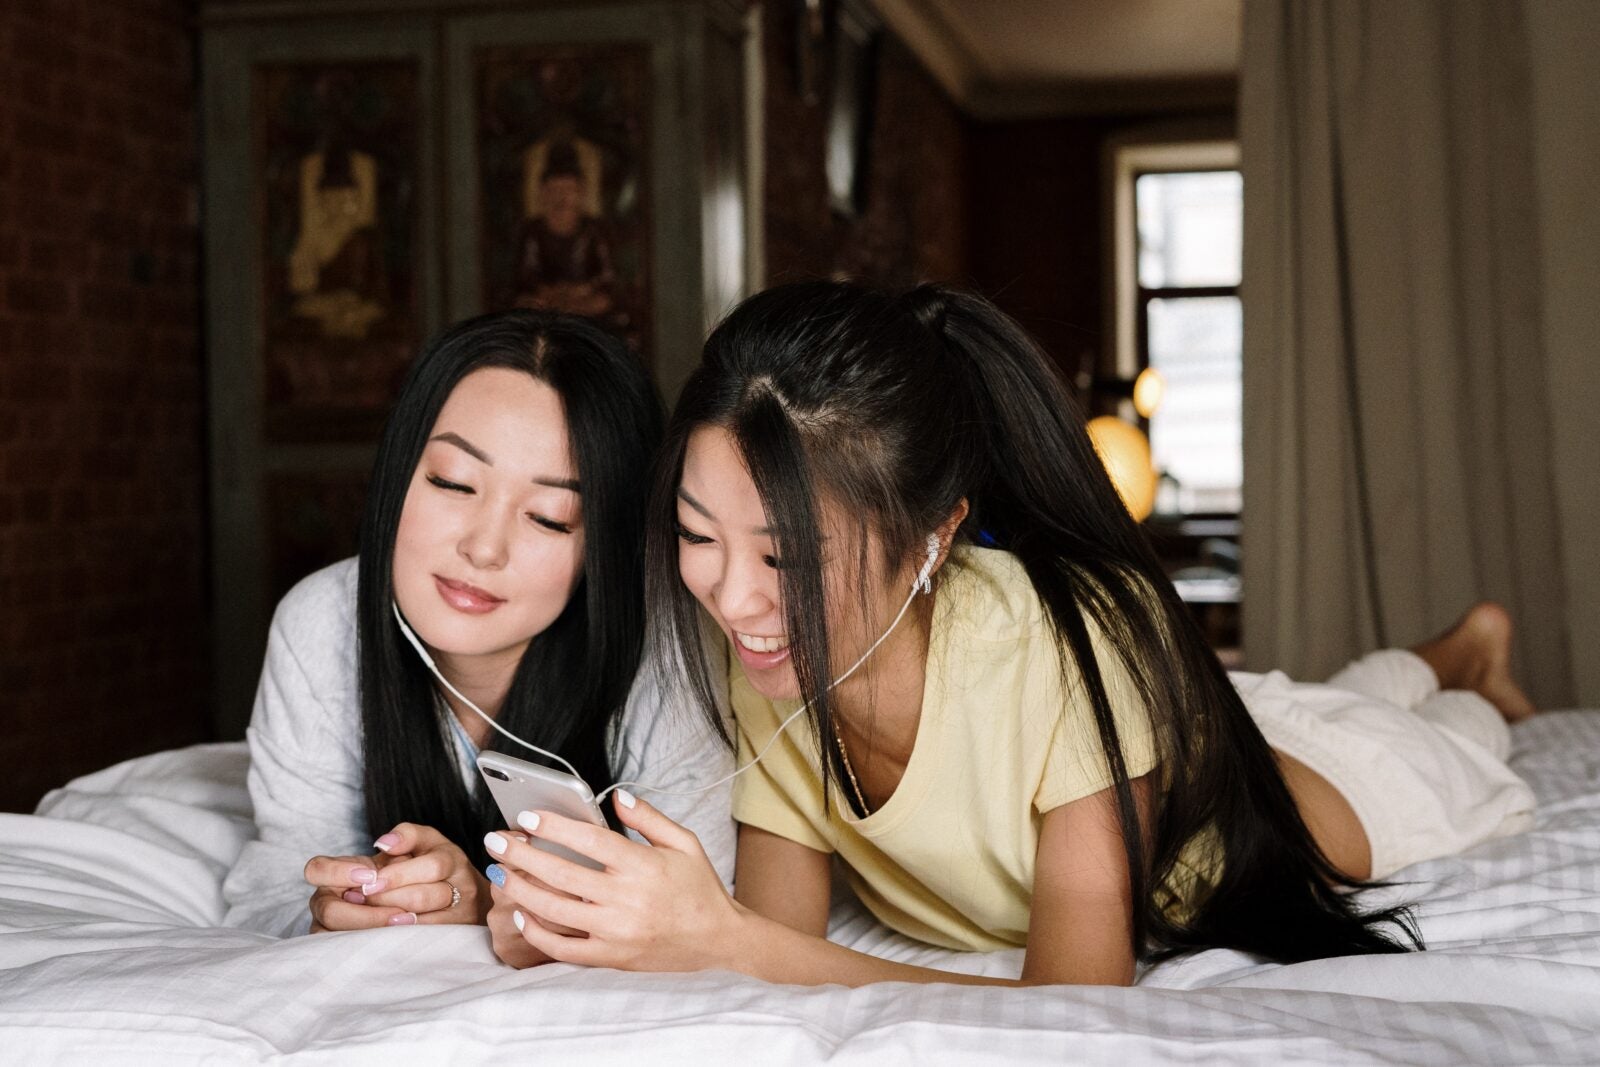 Two girls sharing an earphone and using a smartphone.